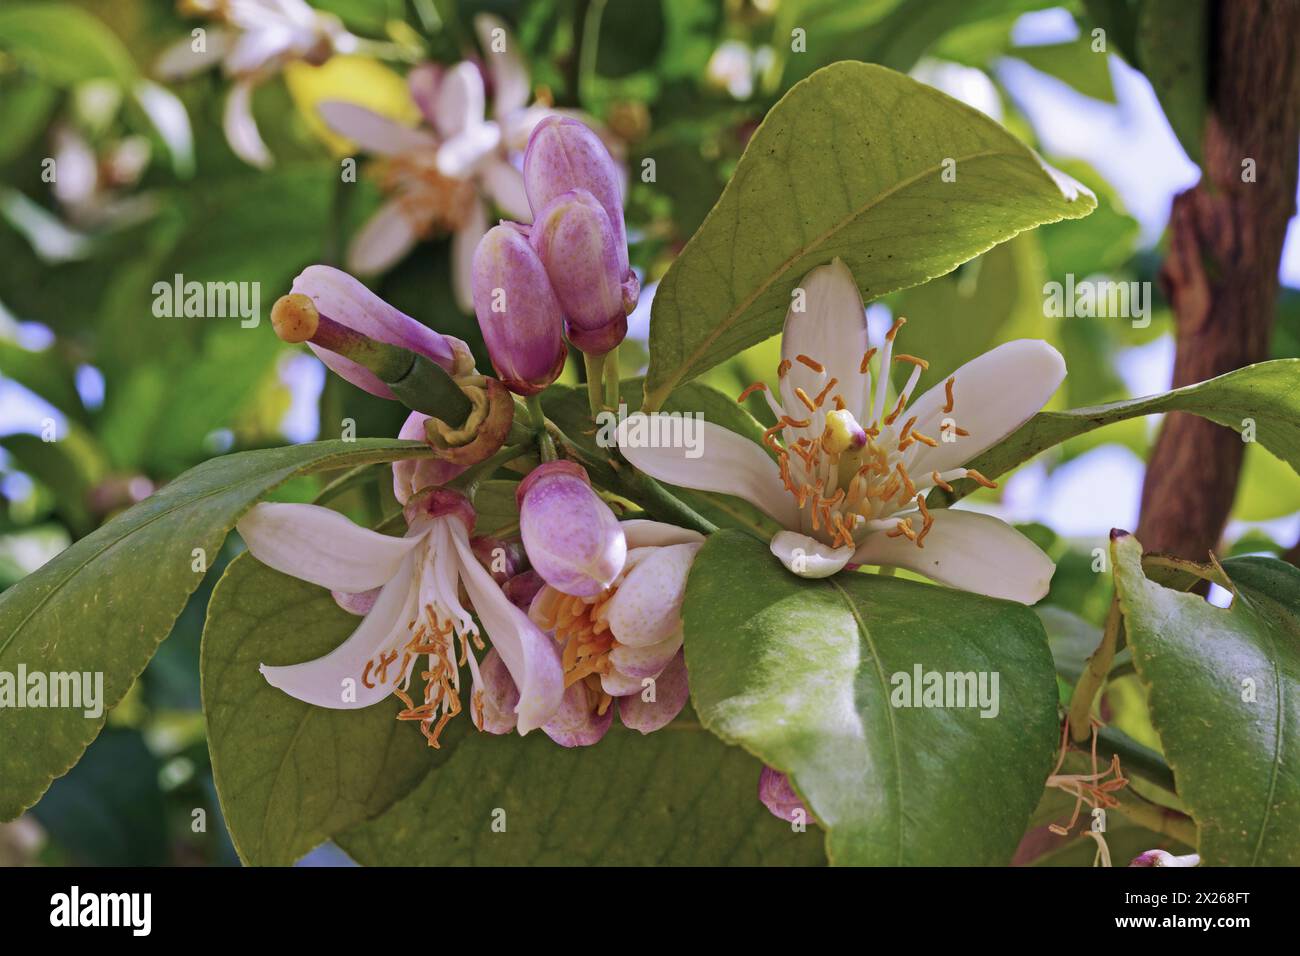 lemon plant in blooming, detail of leaves, flowers and buds, Citrus limon; Rutaceae Stock Photo